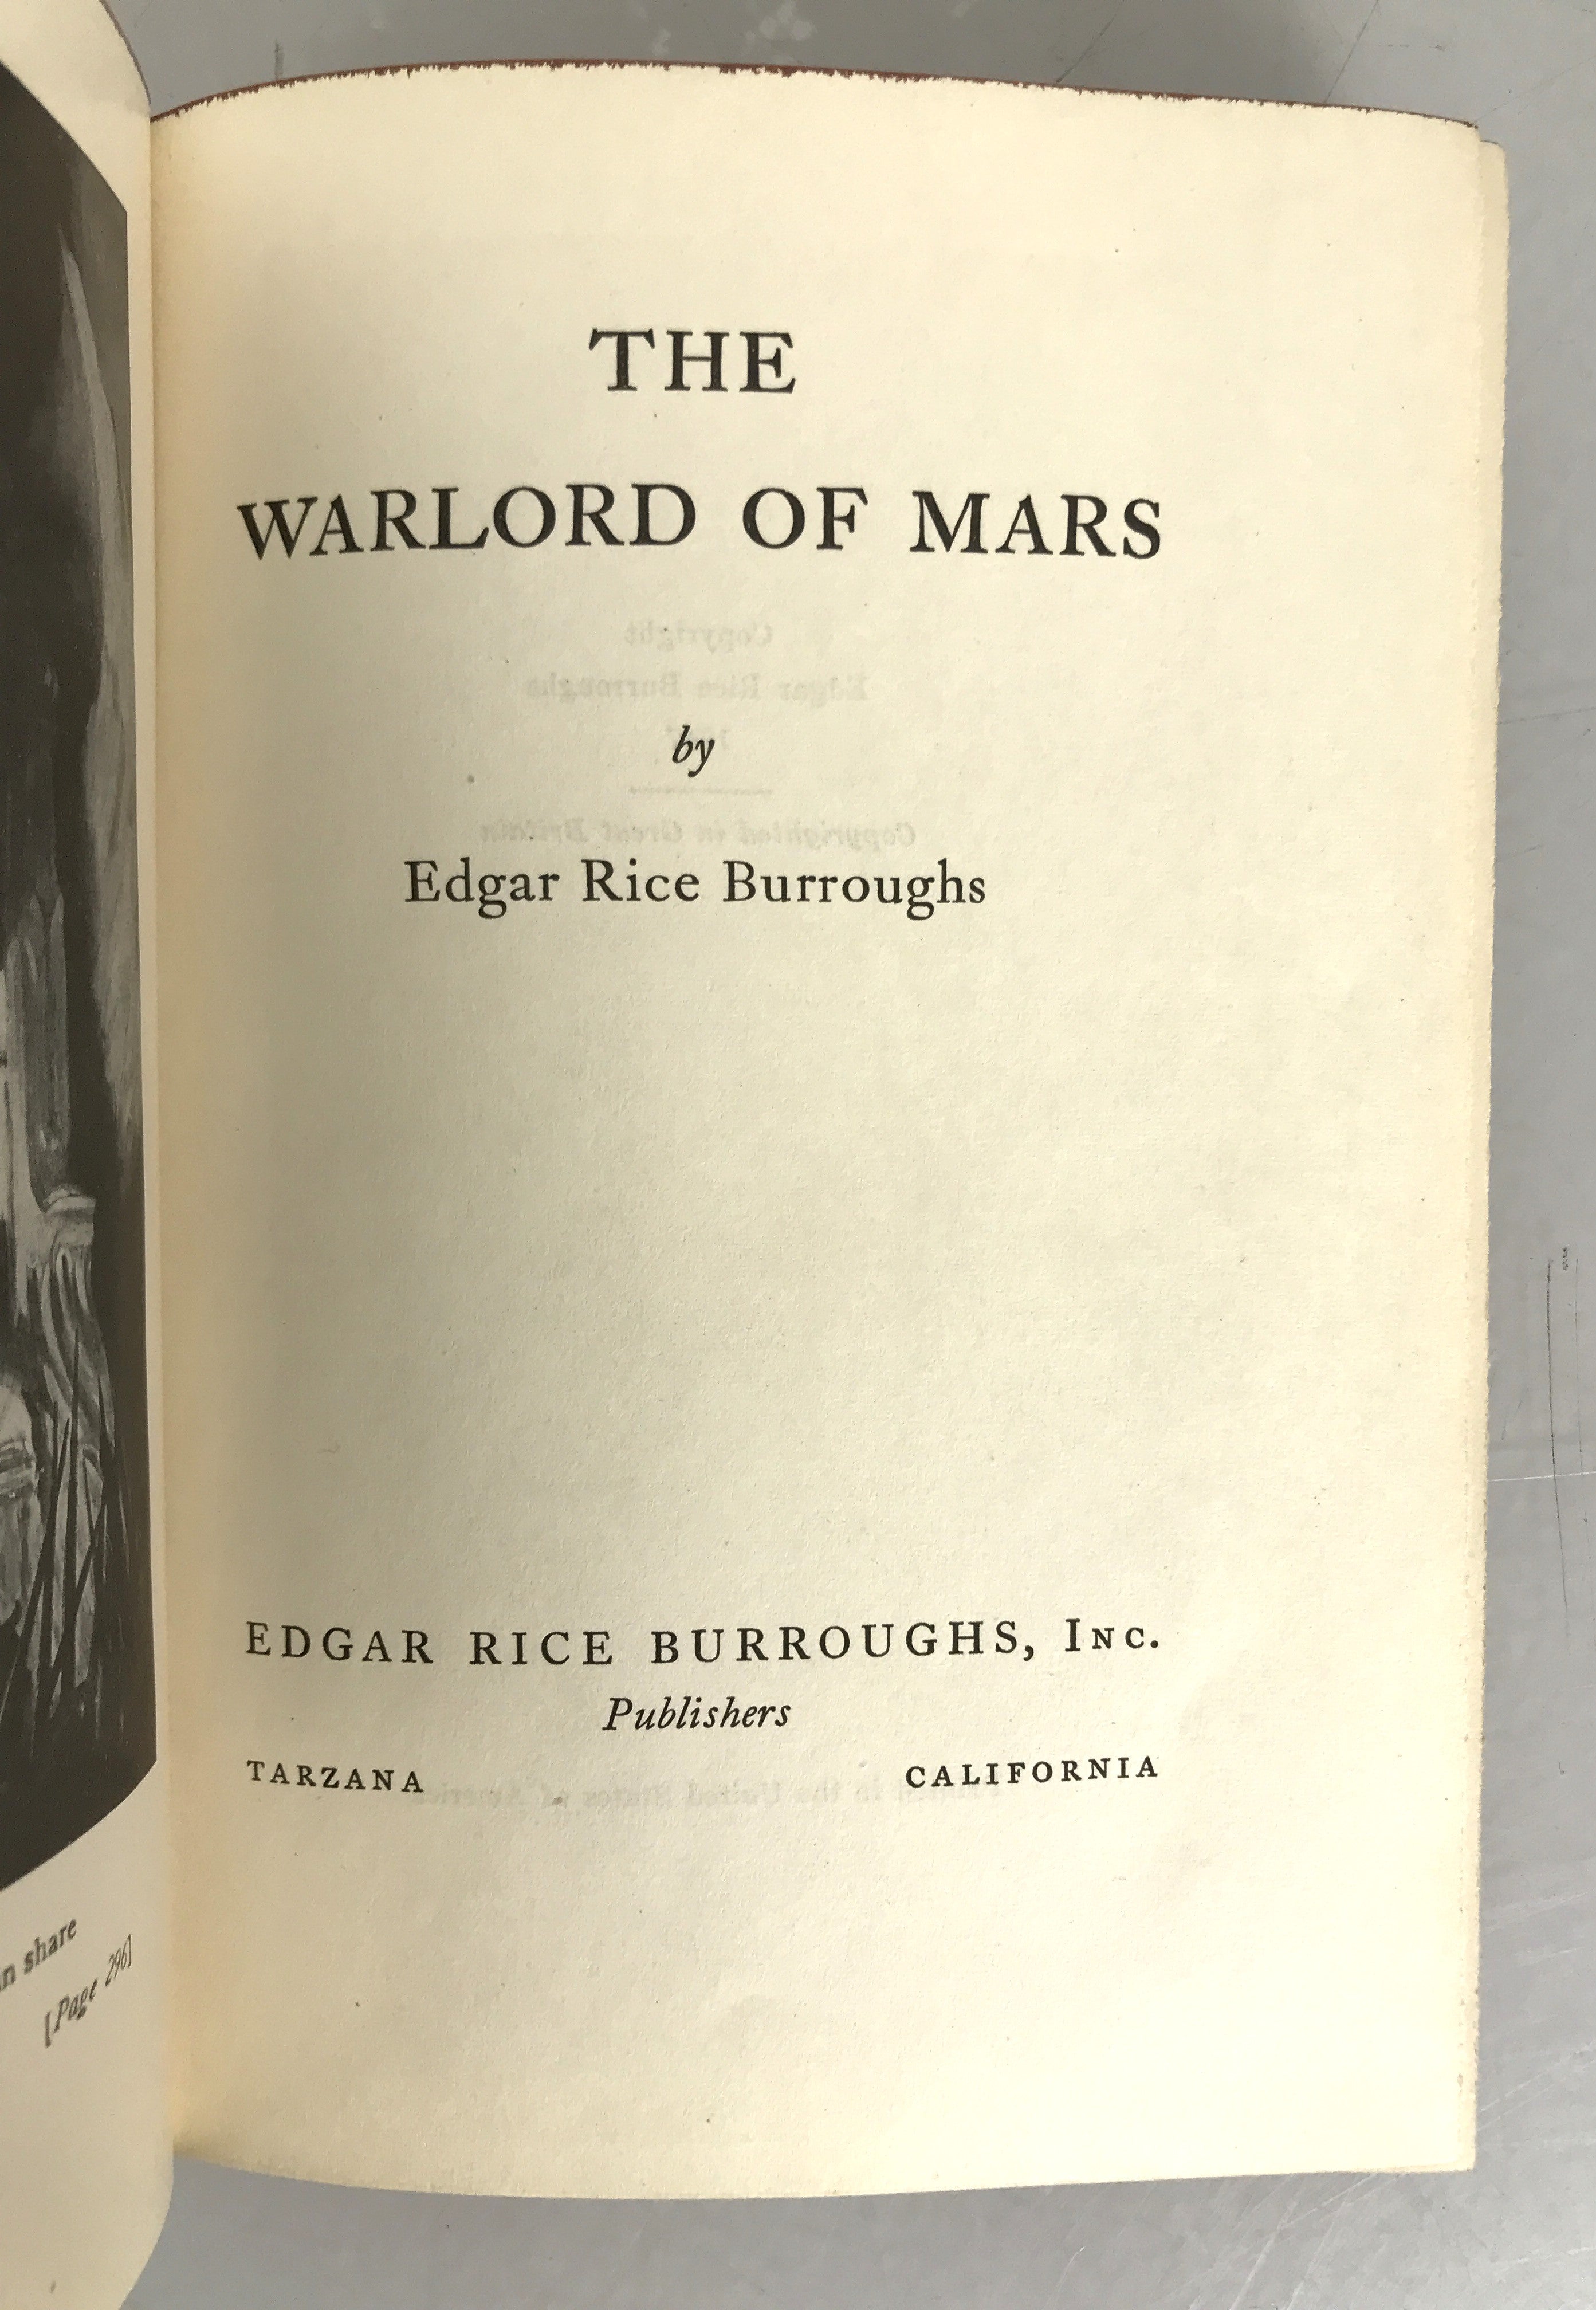 Lot of 4 Edgar Rice Burroughs Mars Series Books: The Gods of Mars, The Chessmen of Mars, A Princess of Mars, and The Warlord of Mars 1918-1947 HC